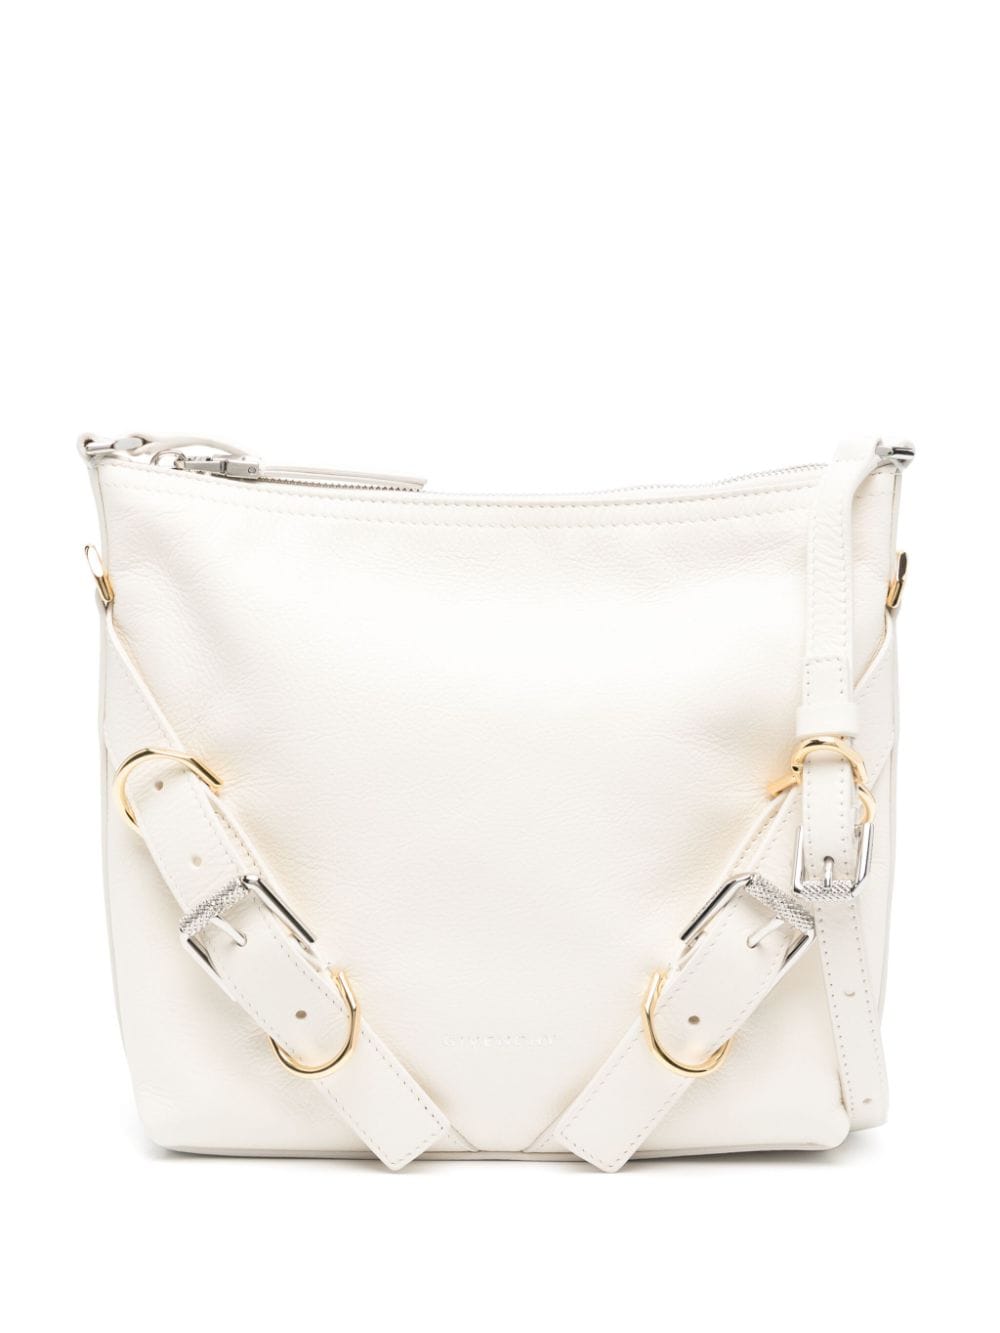 Givenchy Voyou leather cross body bag - Neutrals von Givenchy